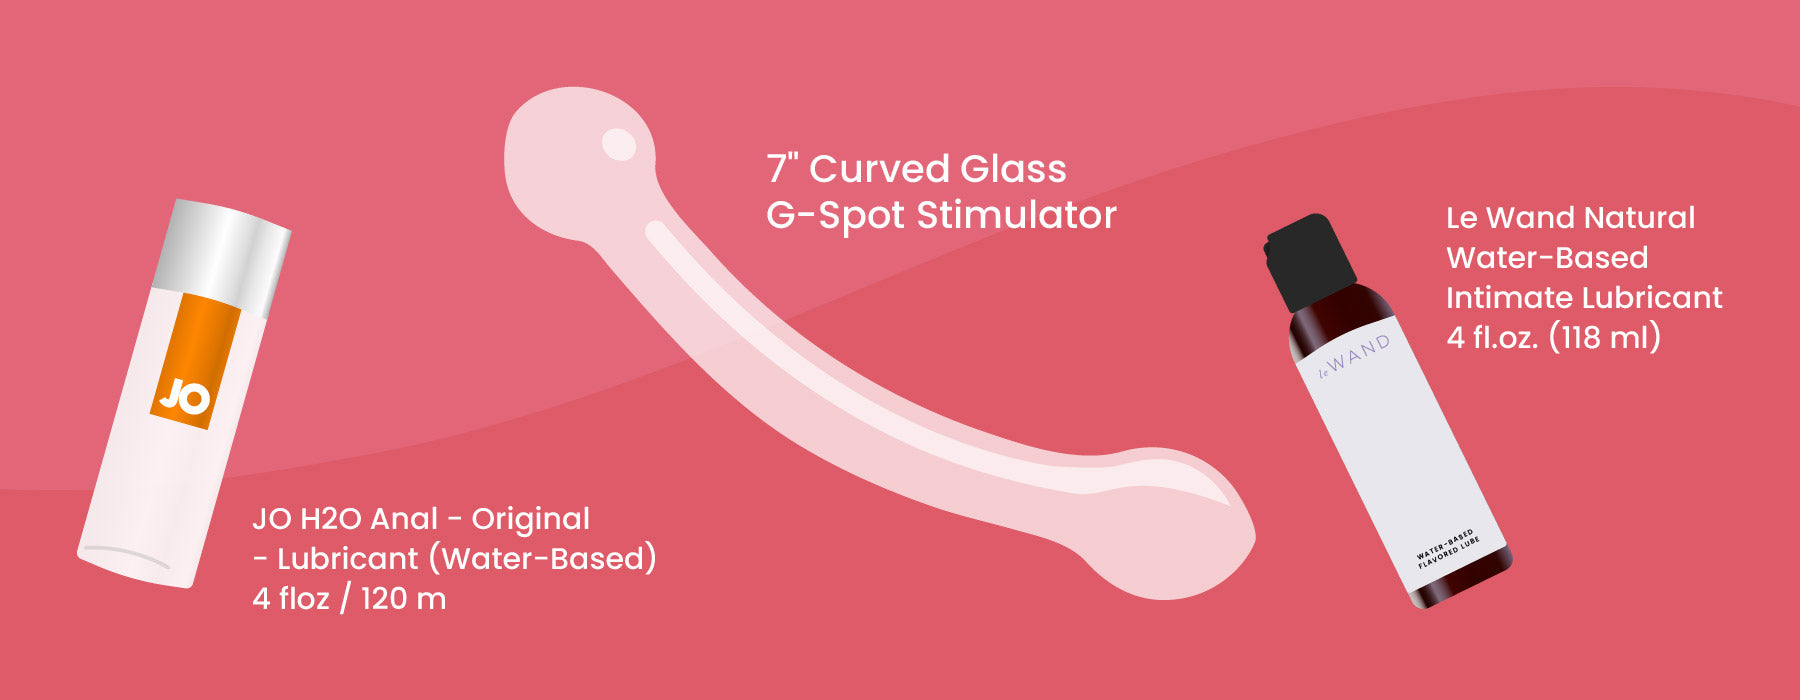 7" Curved Glass G-Spot Stimulator with Le Wand Natural Water-Based Intimate Lubricant and JO H20 Anal Original Lubricant (Water-Based)